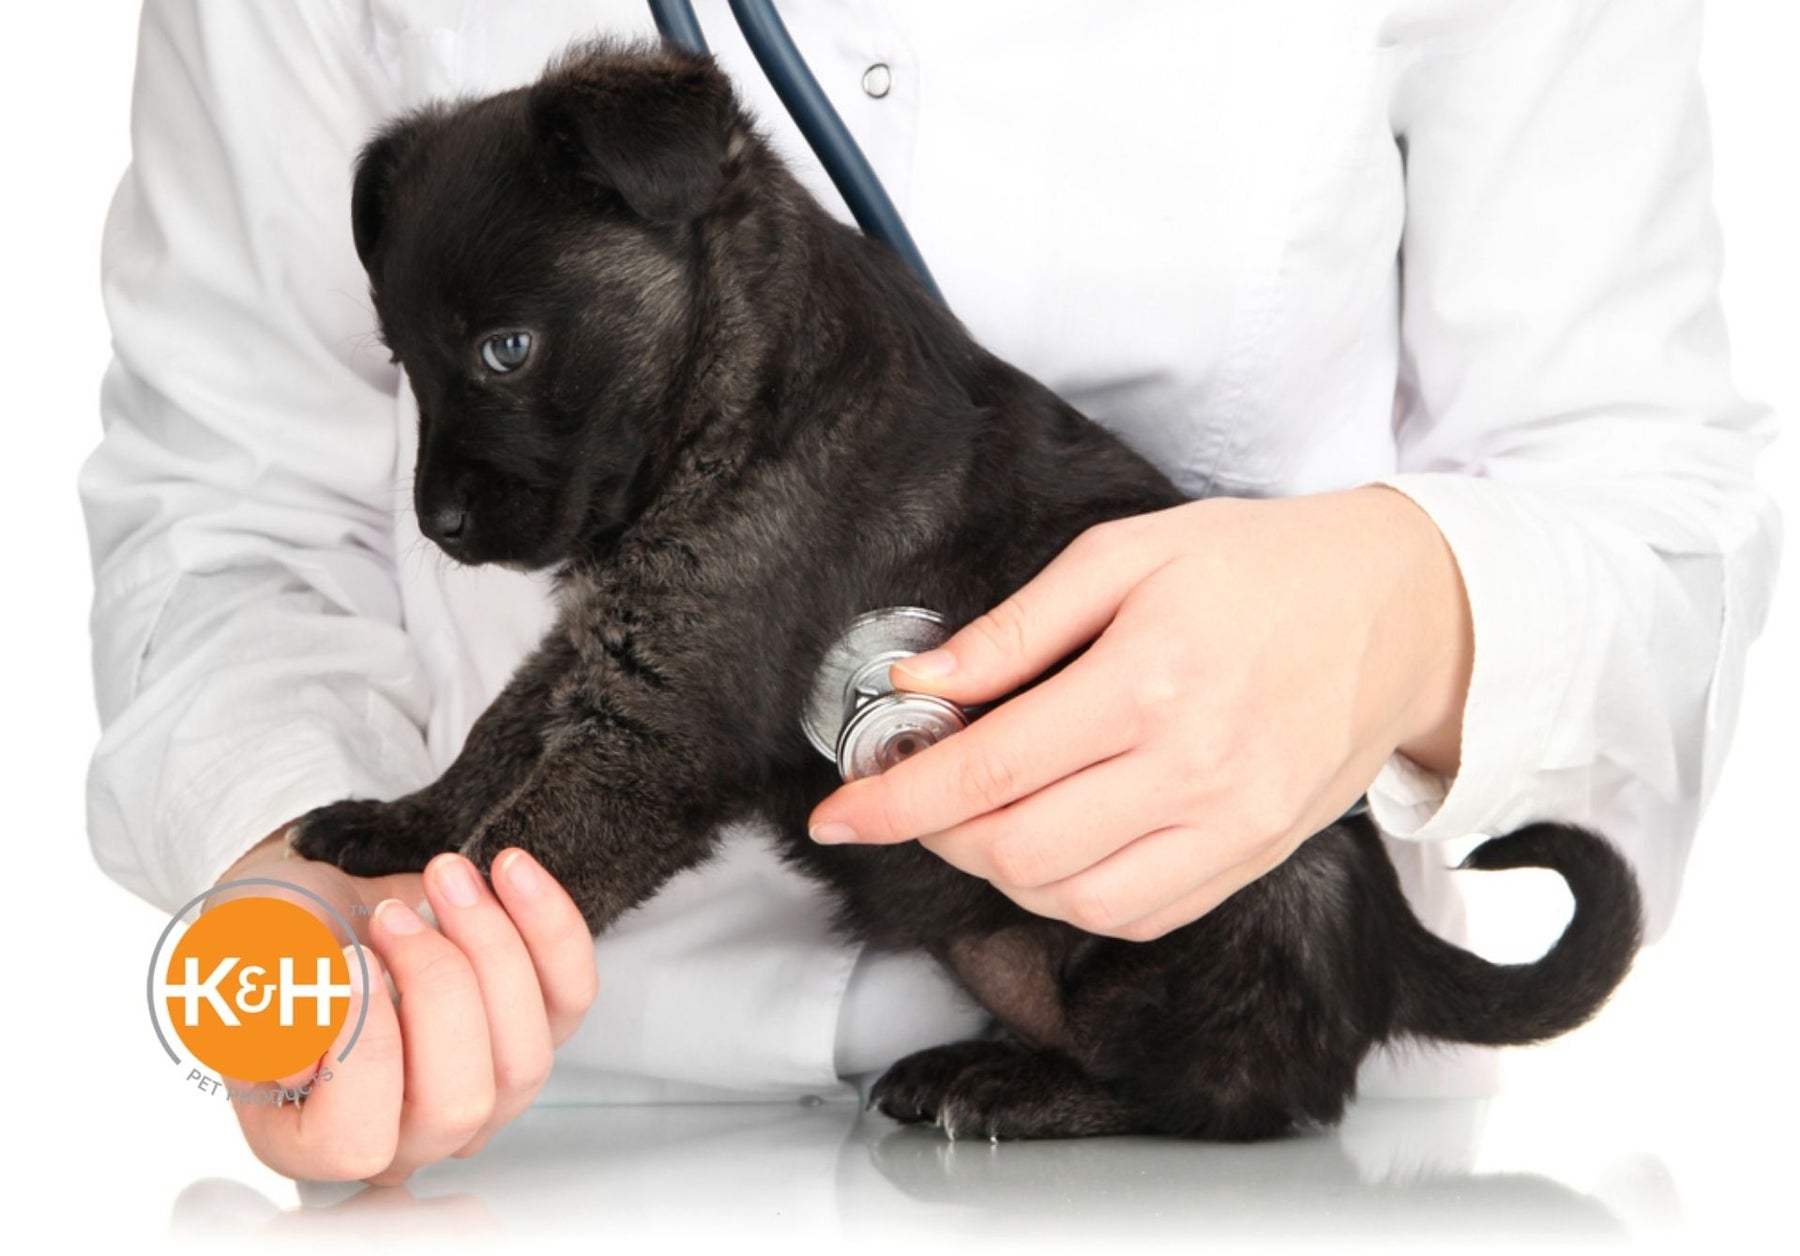 Is your dog's heart rate normal? Heart rate, respiratory rate, and body temperature can provide indications of your dog's health.